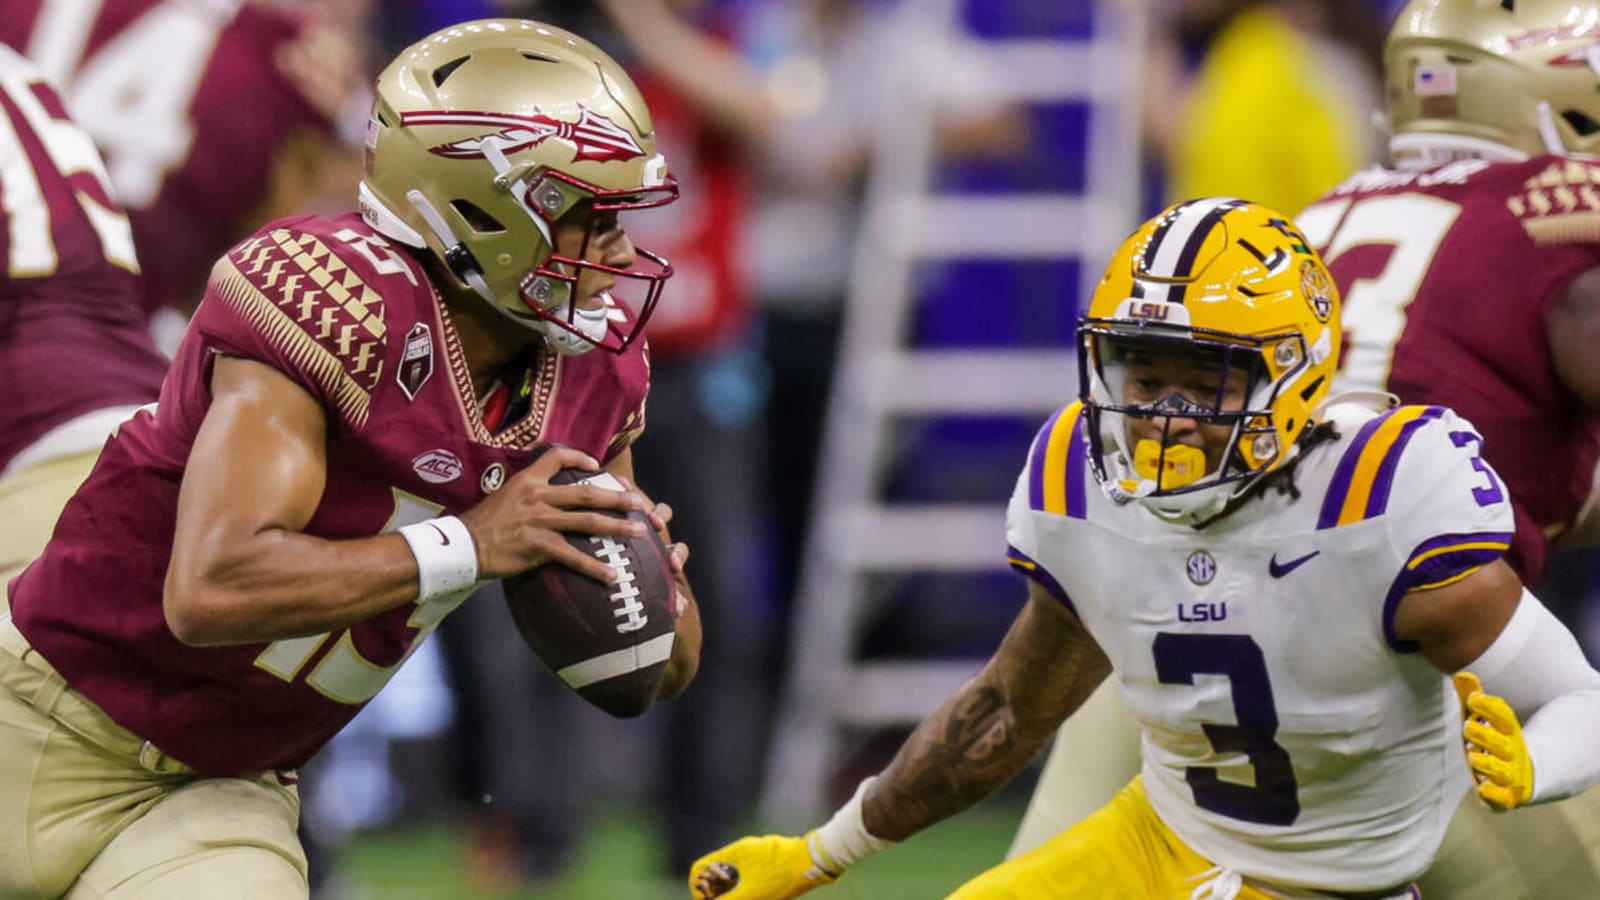 Watch: LSU loses to Florida State on unbelievable blocked extra point